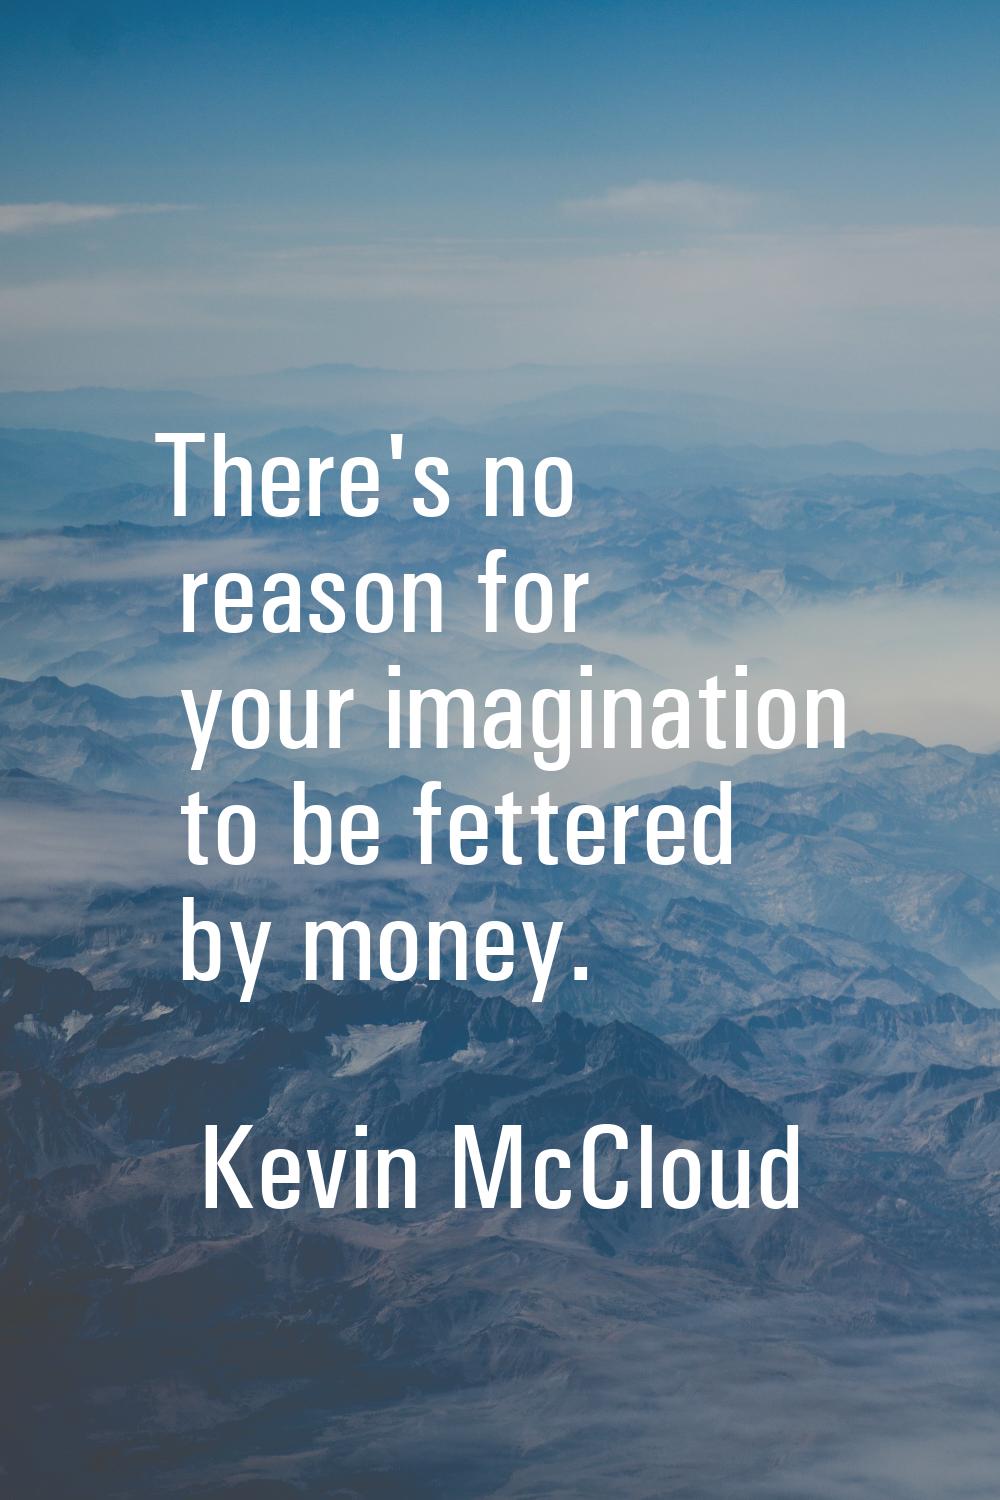 There's no reason for your imagination to be fettered by money.